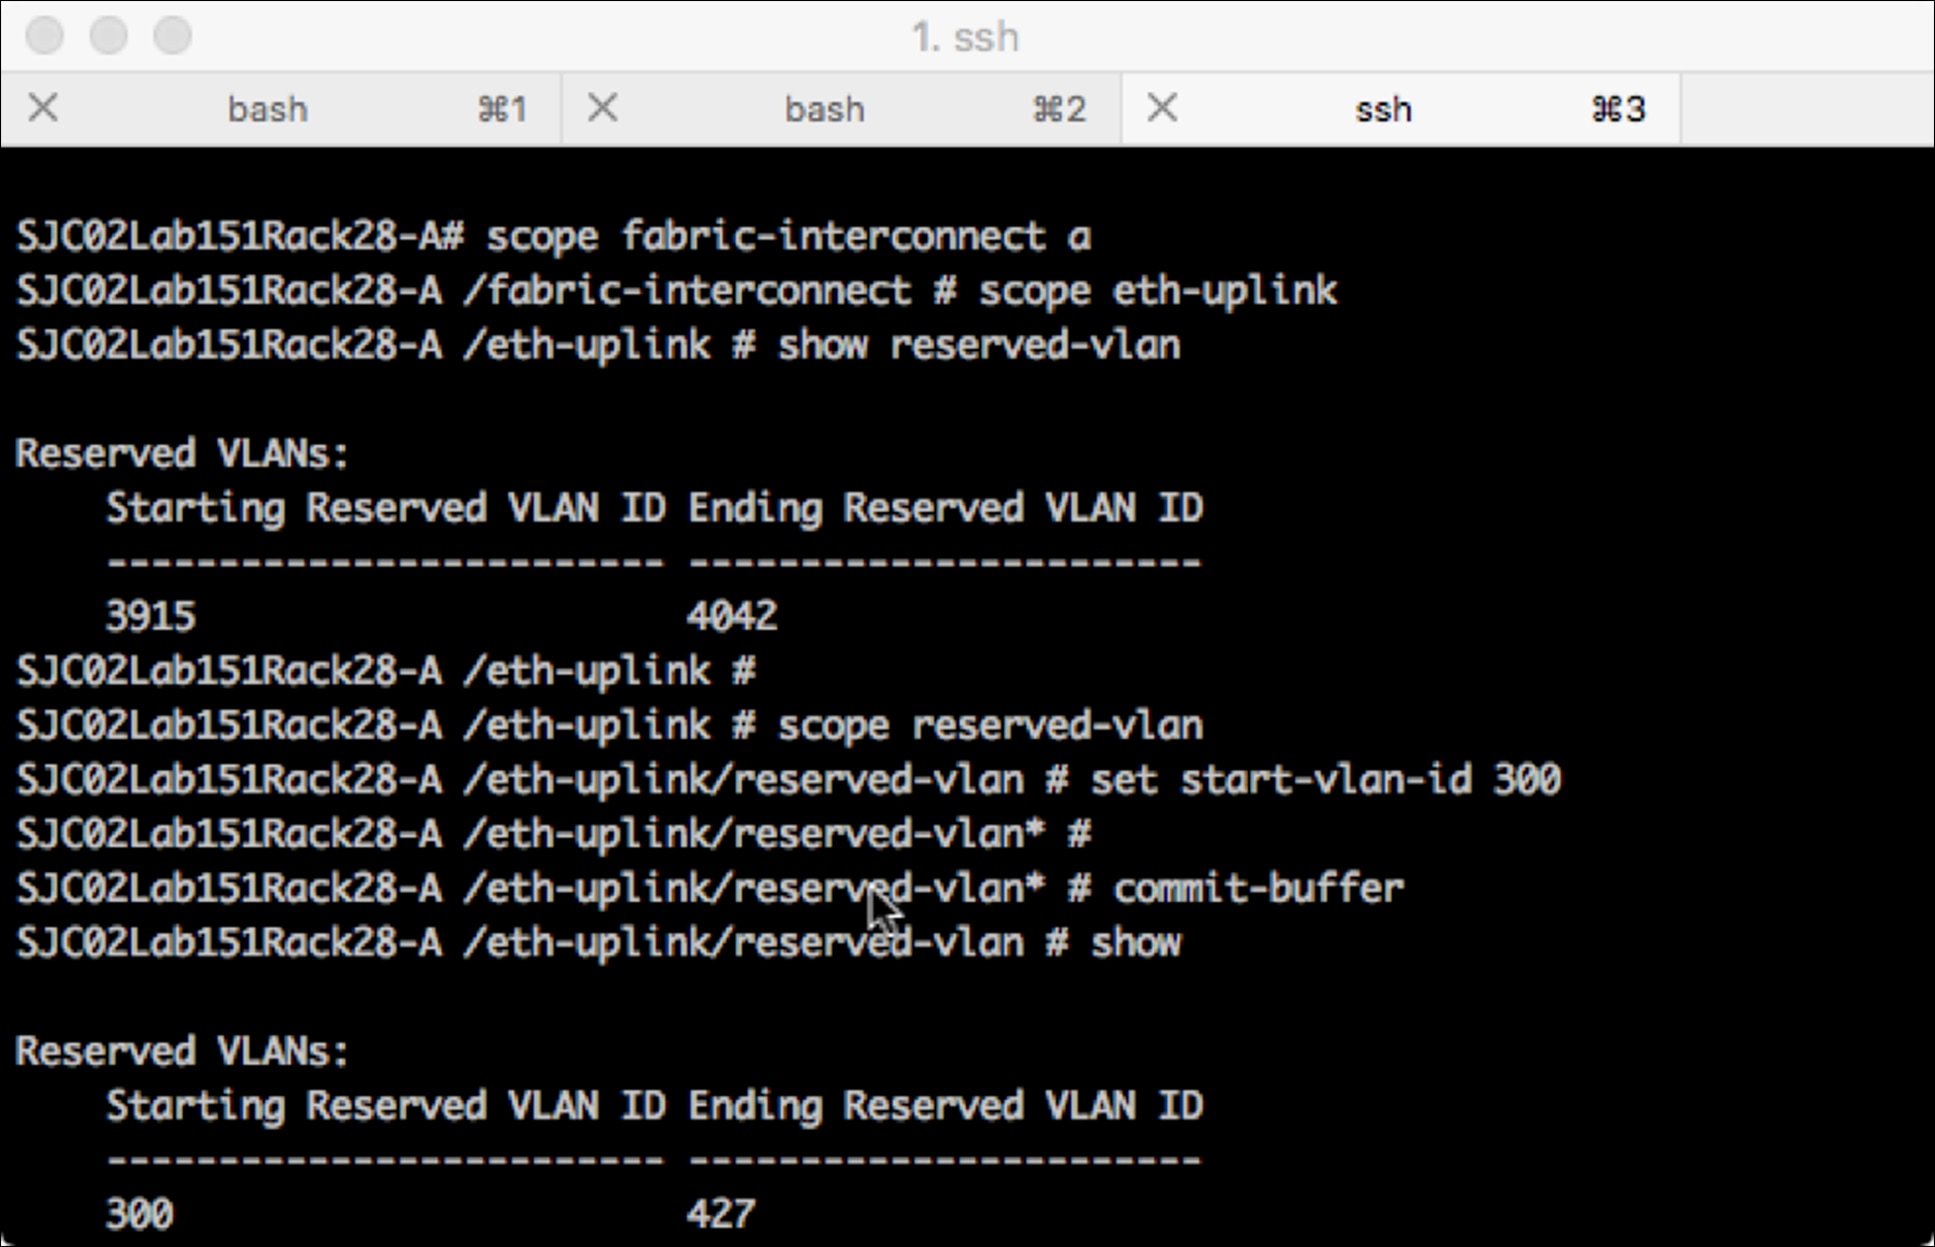 Changing the reserved VLANs in the CLI